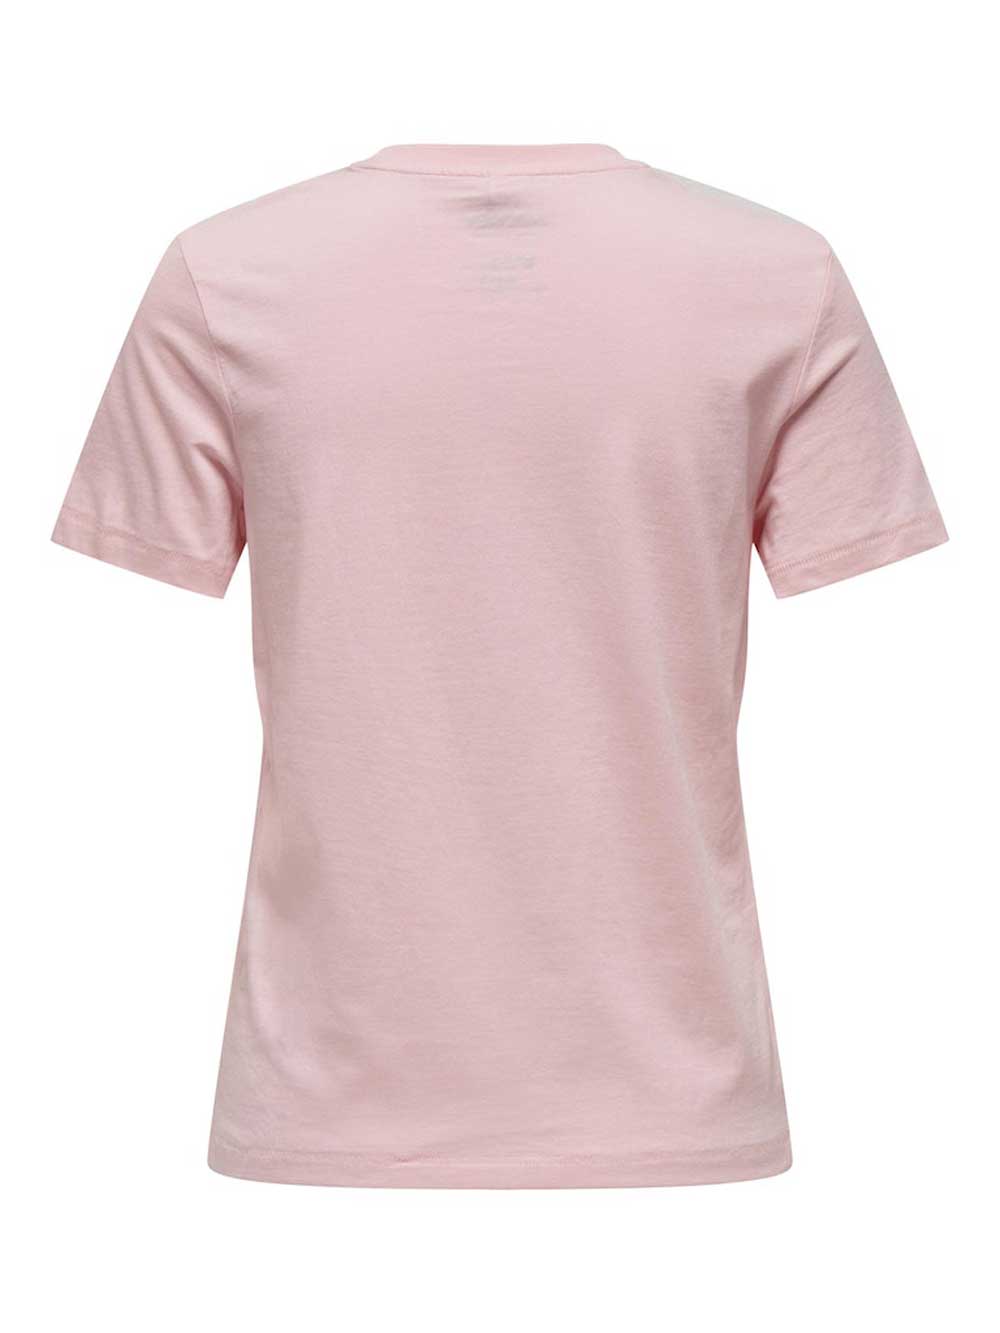 ONLY T-shirts e Tops ONLY da DONNA - rosa